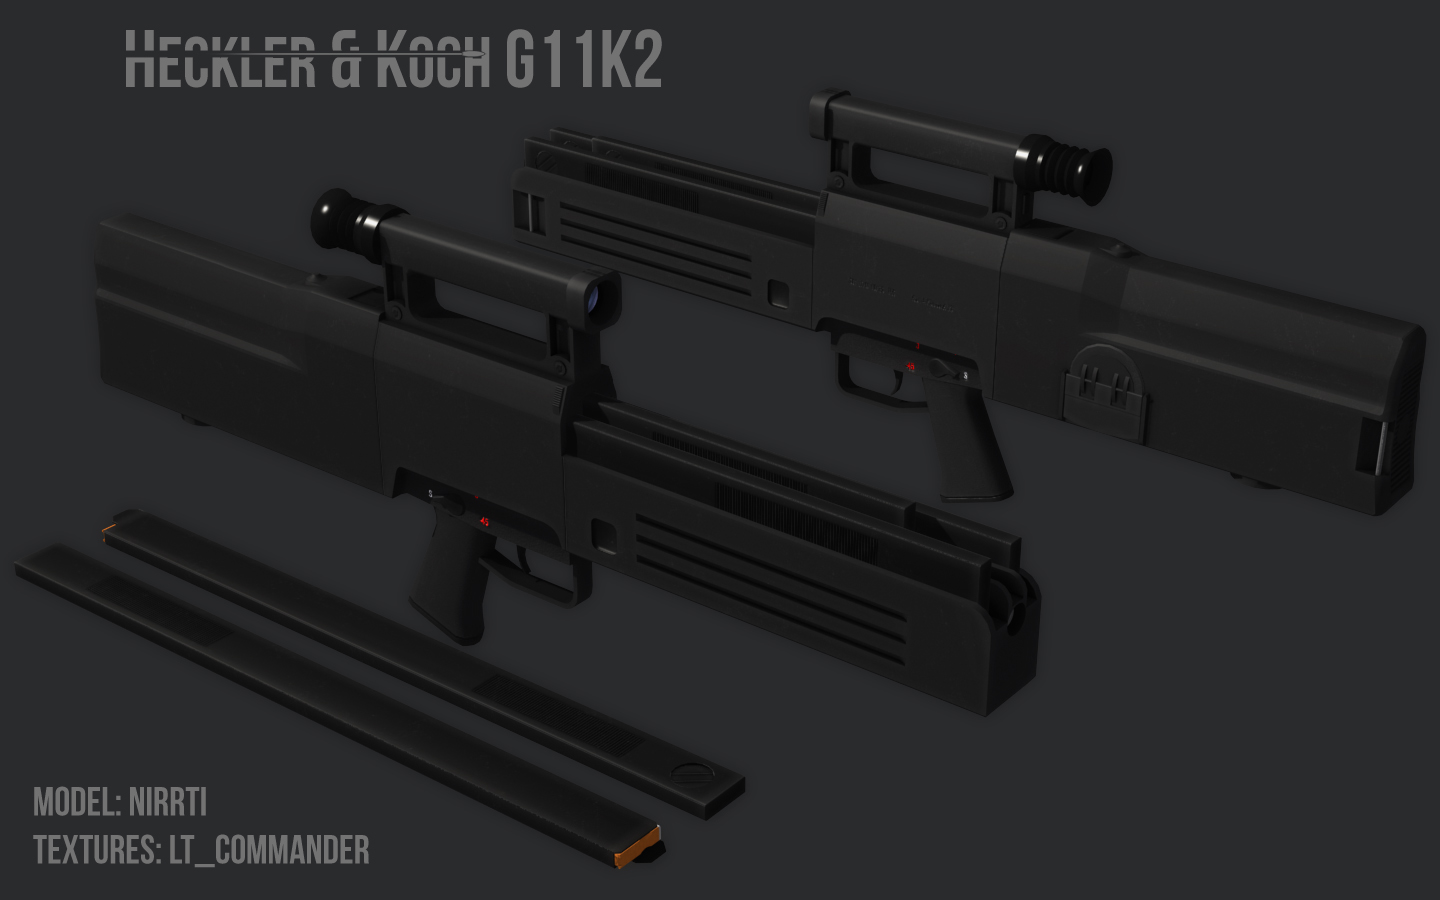 And here’s the finished G11K2 in a pretty render. 